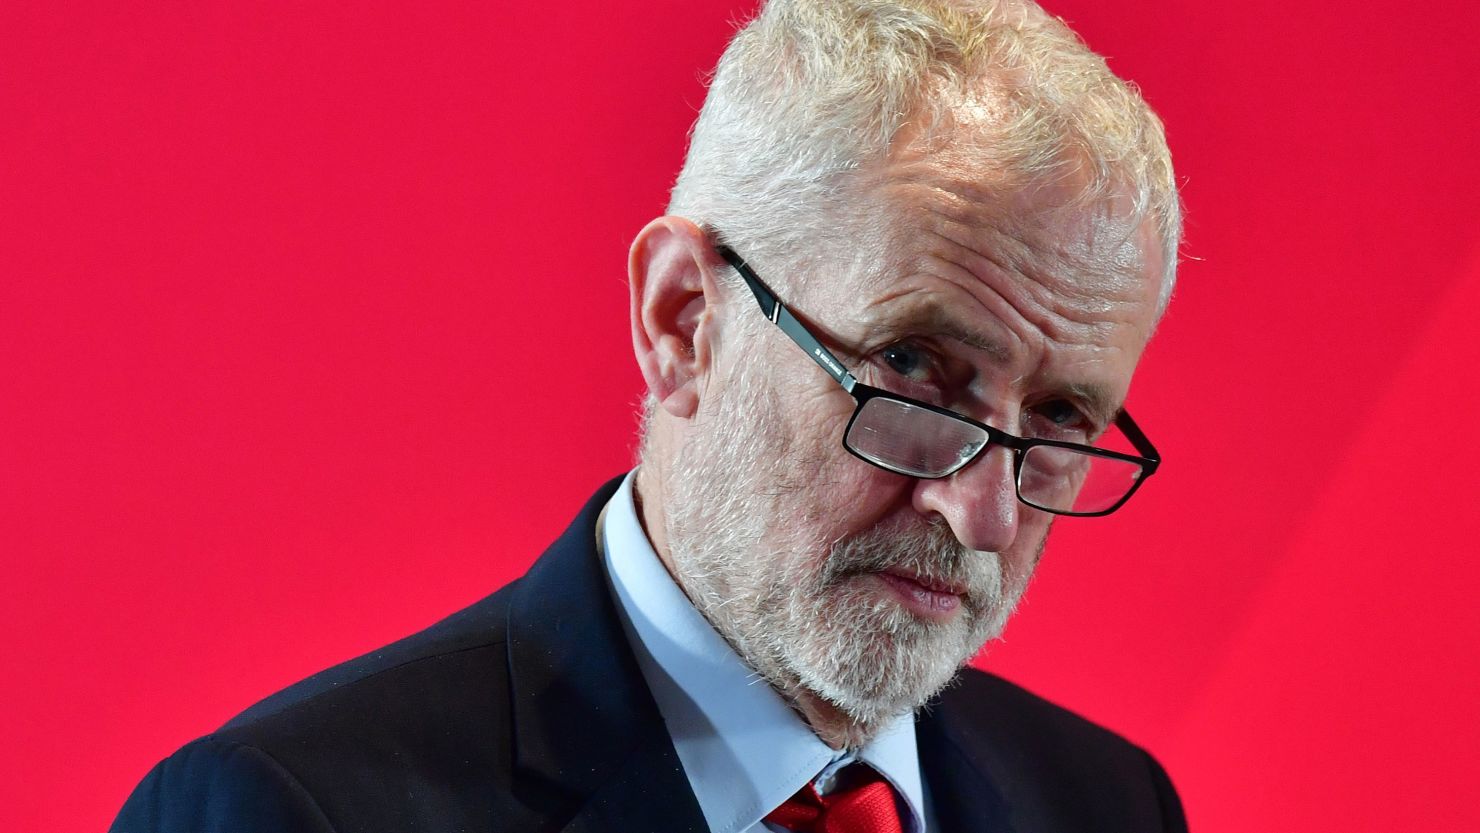 Former Labour leader Jeremy Corbyn was suspended from the party Thursday.